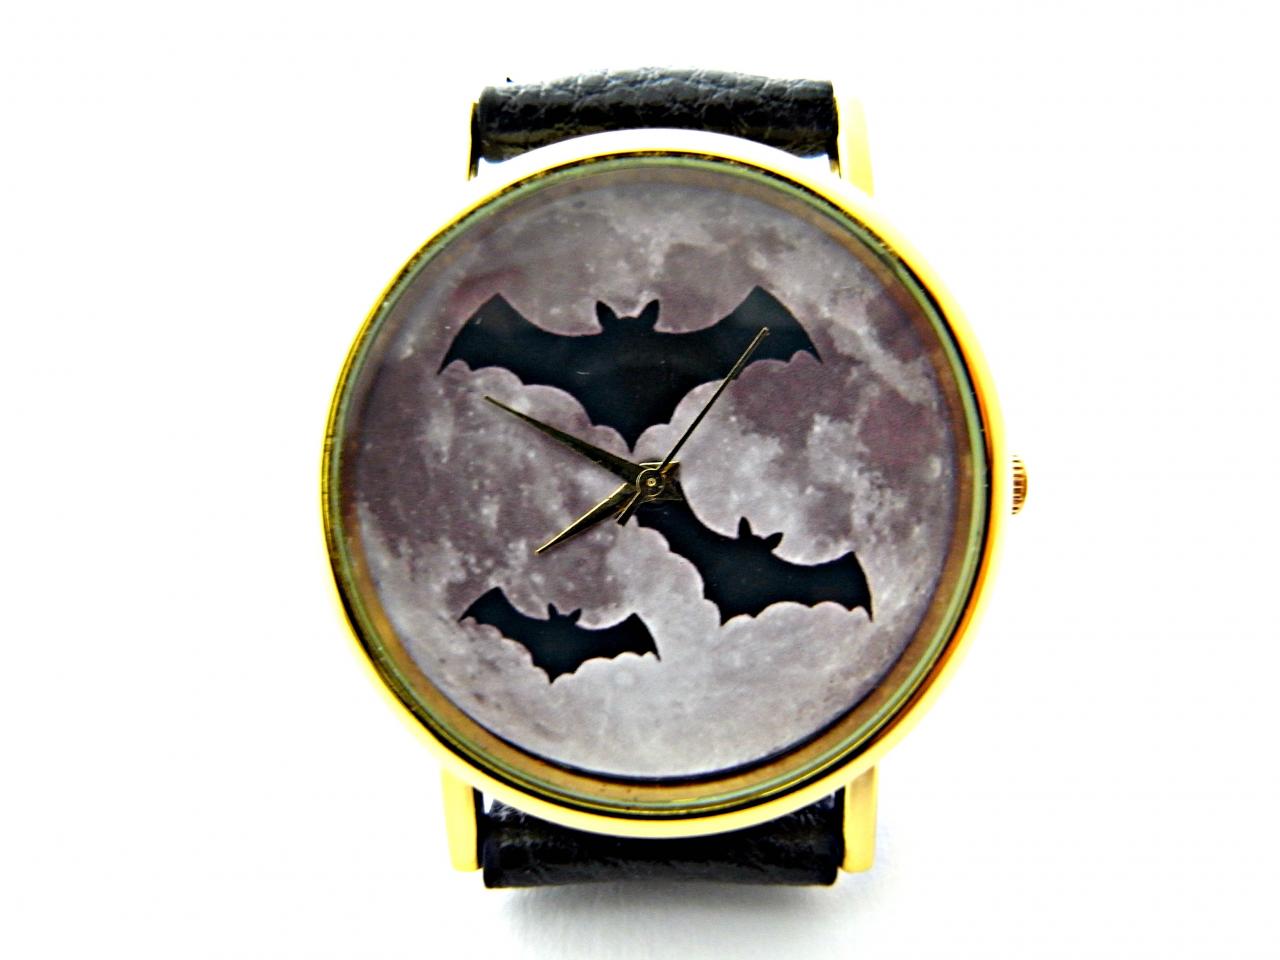 Bat And Moon Leather Wrist Watches, Woman Man Lady Unisex Watch, Genuine Leather Handmade Unique Watch #28